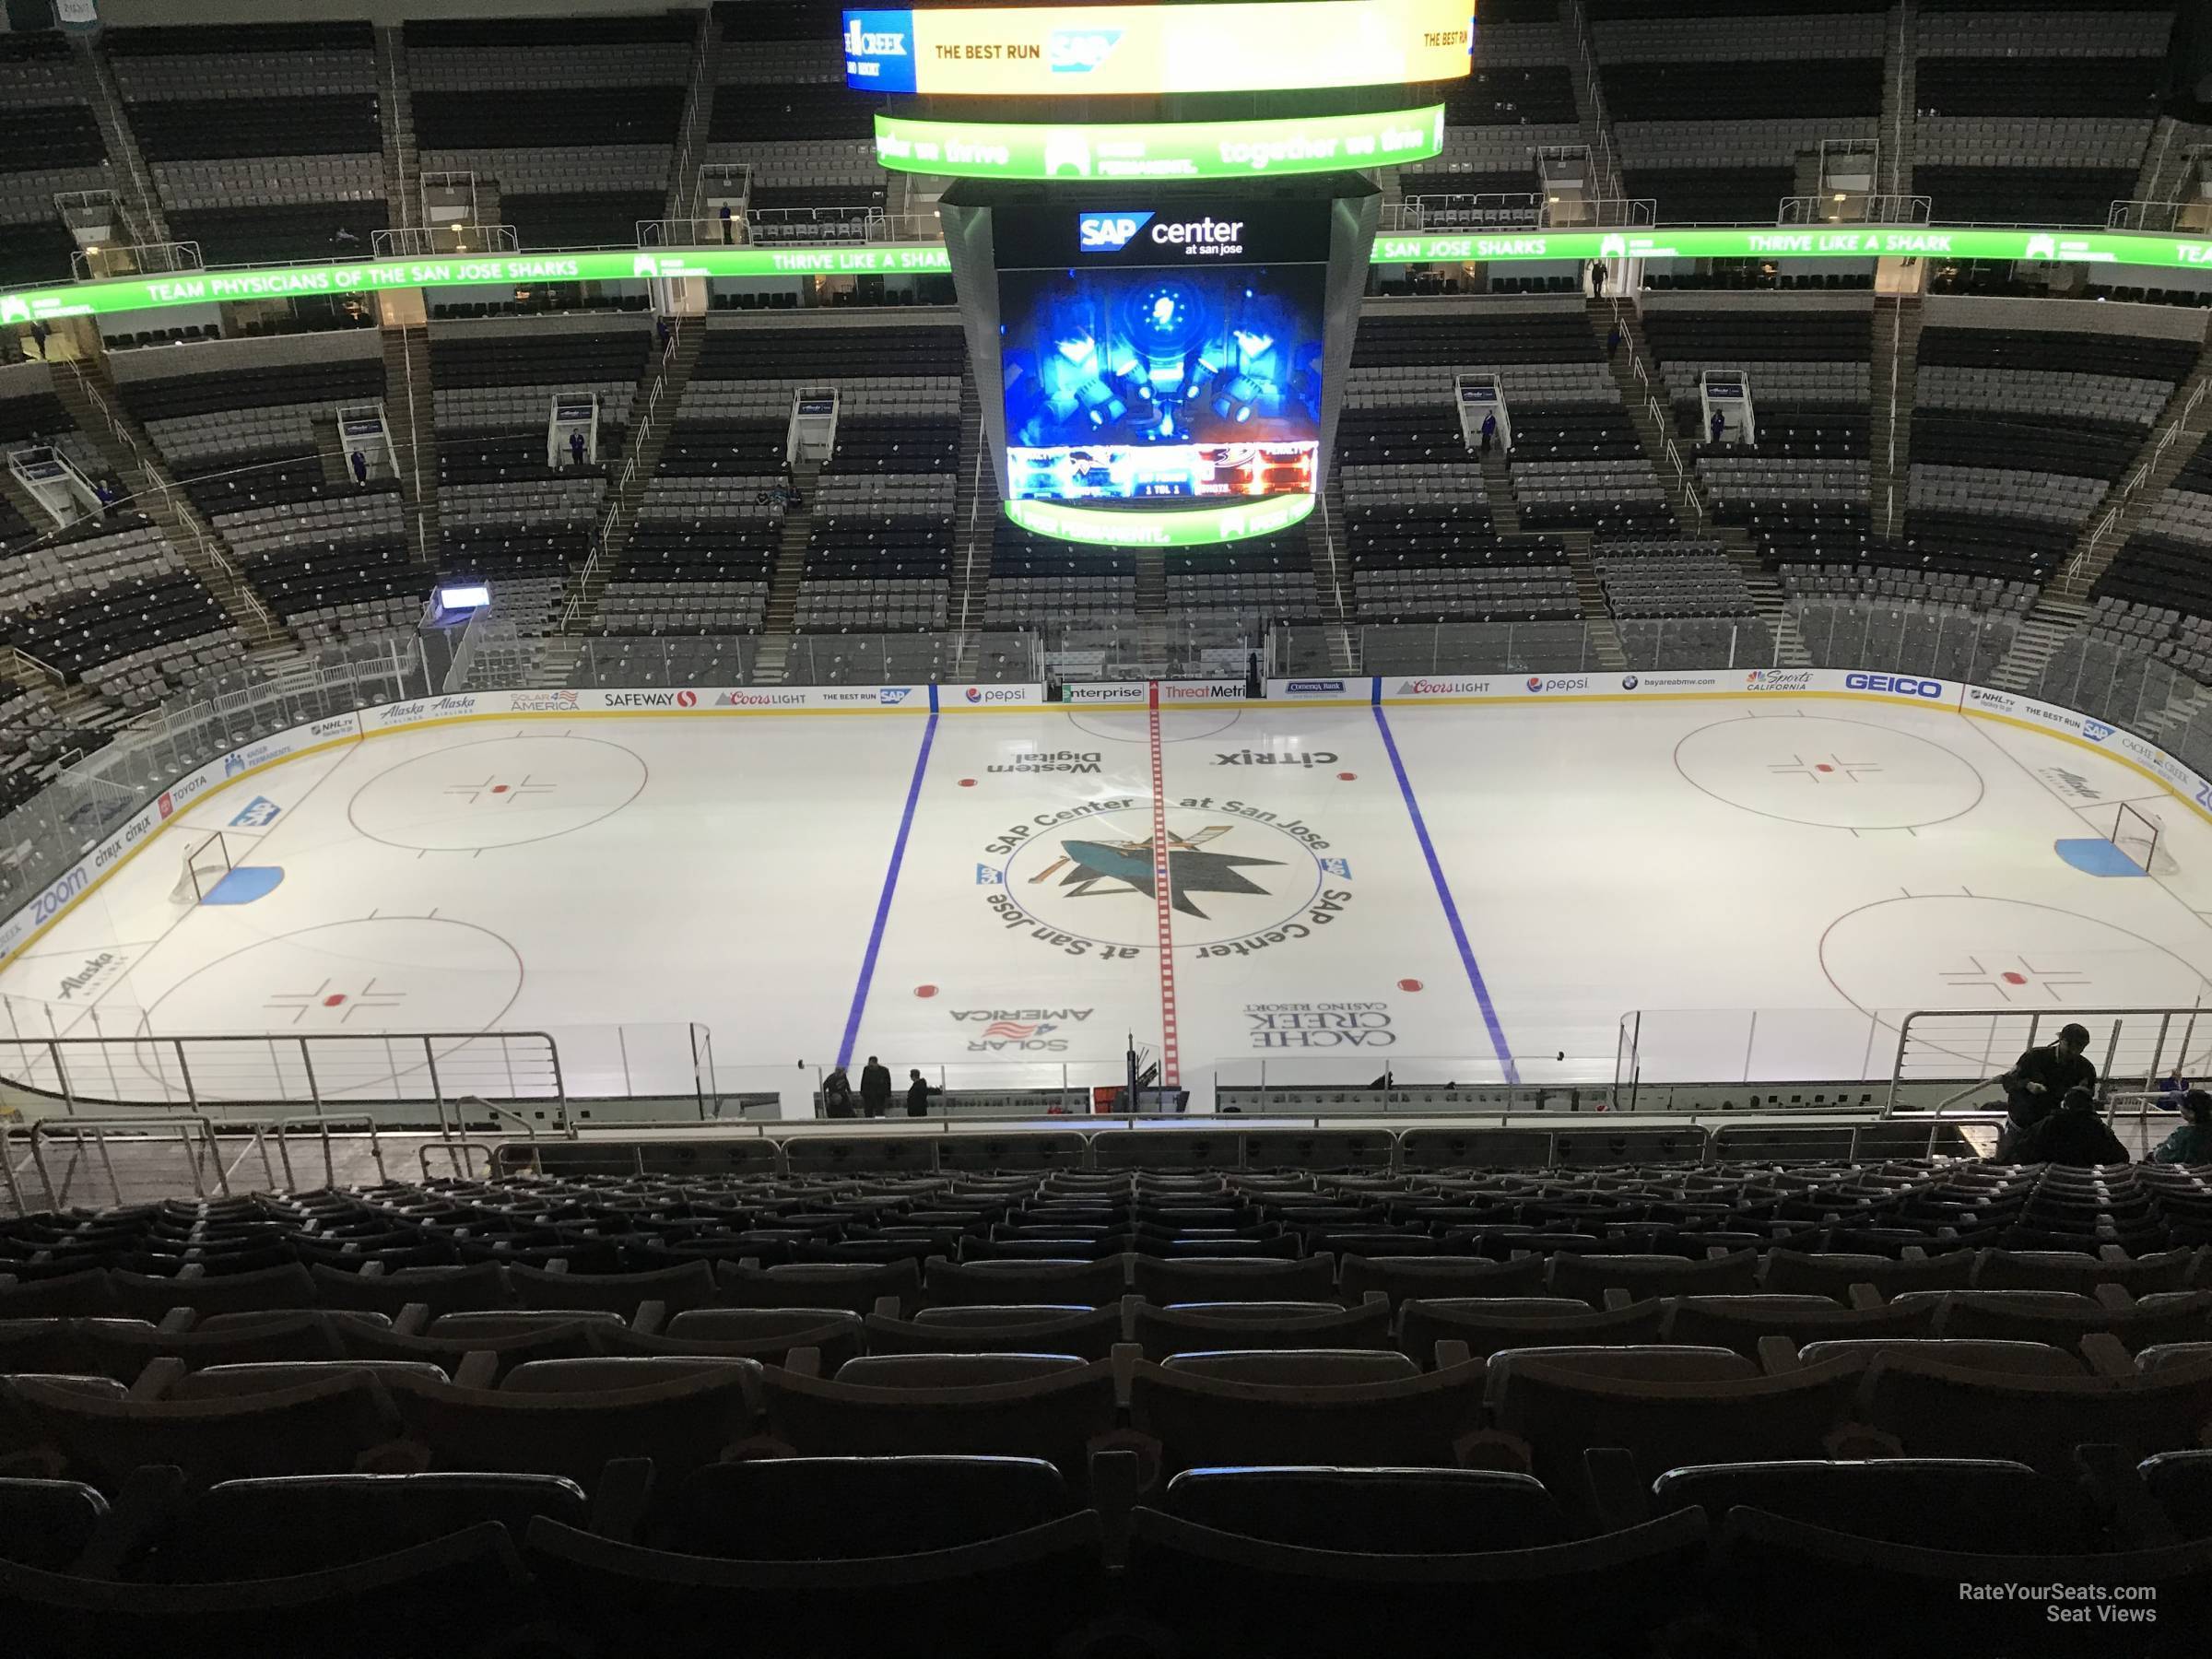 section 201, row 20 seat view  for hockey - sap center